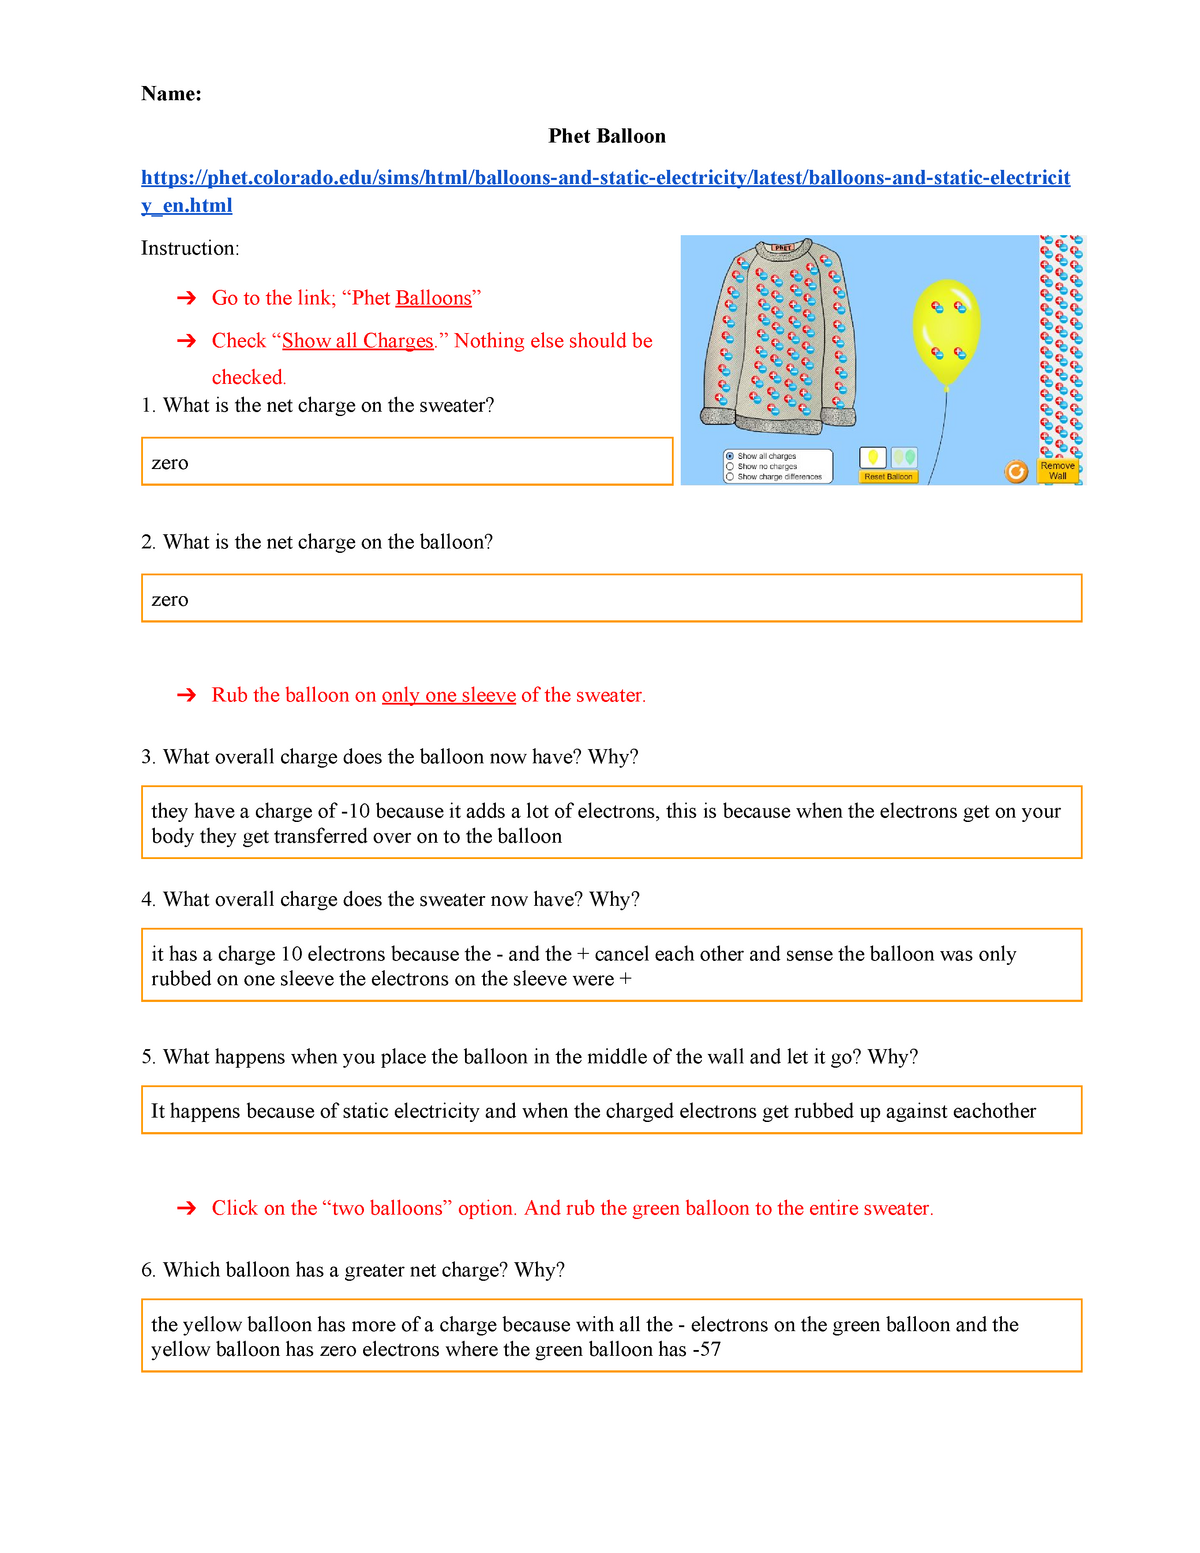 Jake Addy - 21c) Static Electricity Ph ET - Name: Phet Balloon Regarding Static Electricity Worksheet Answers